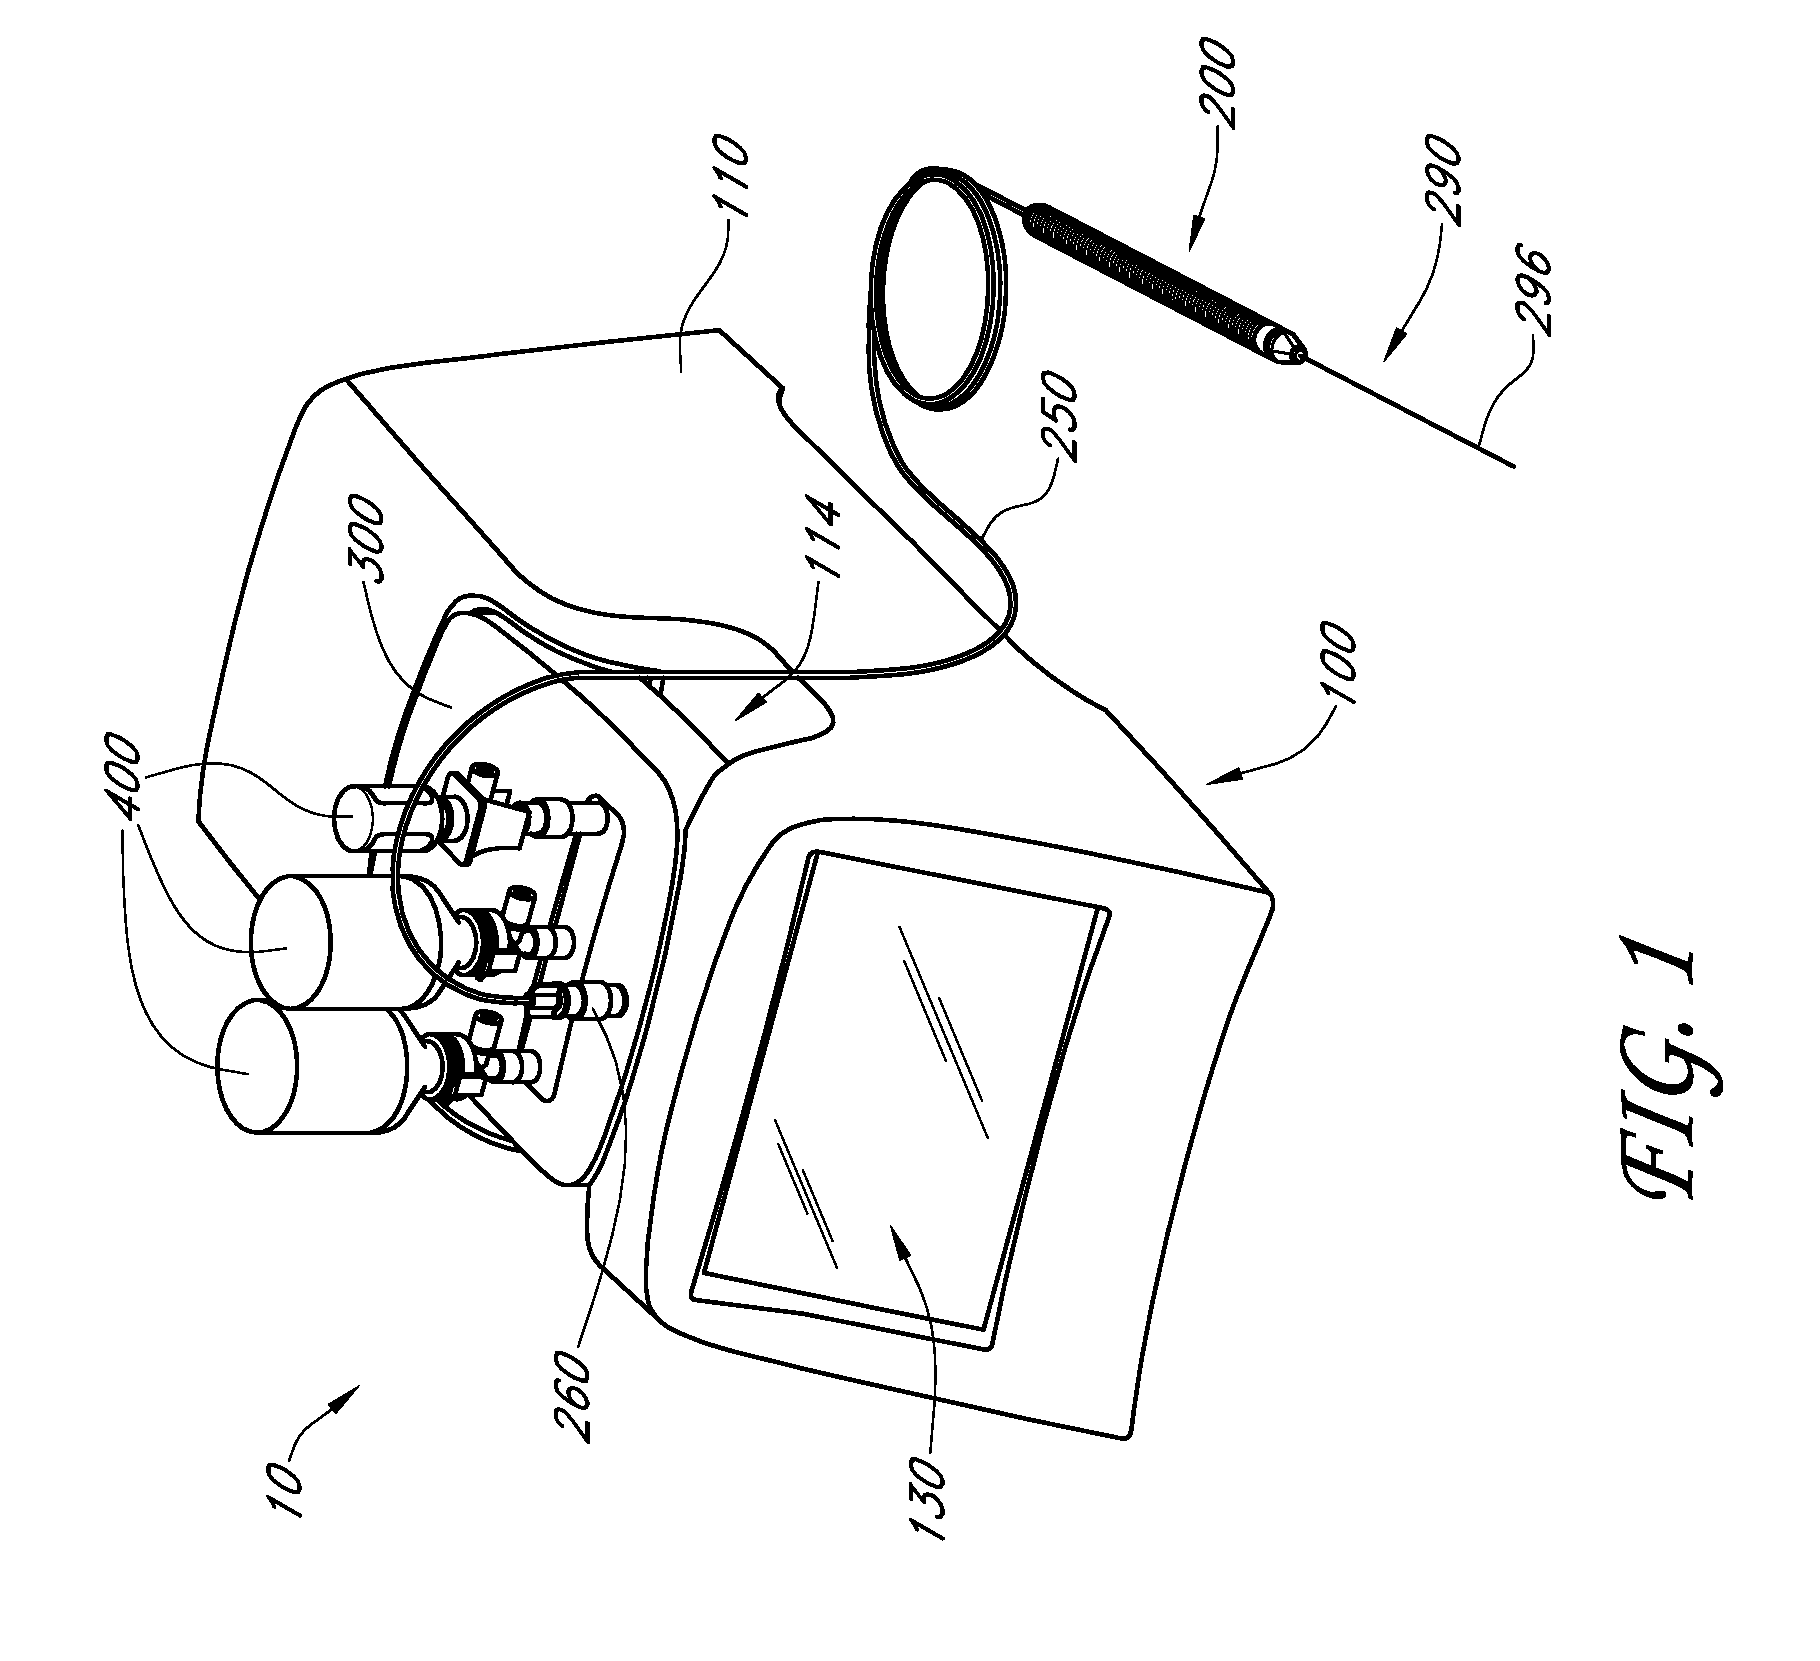 Injection system for delivering multiple fluids within the anatomy